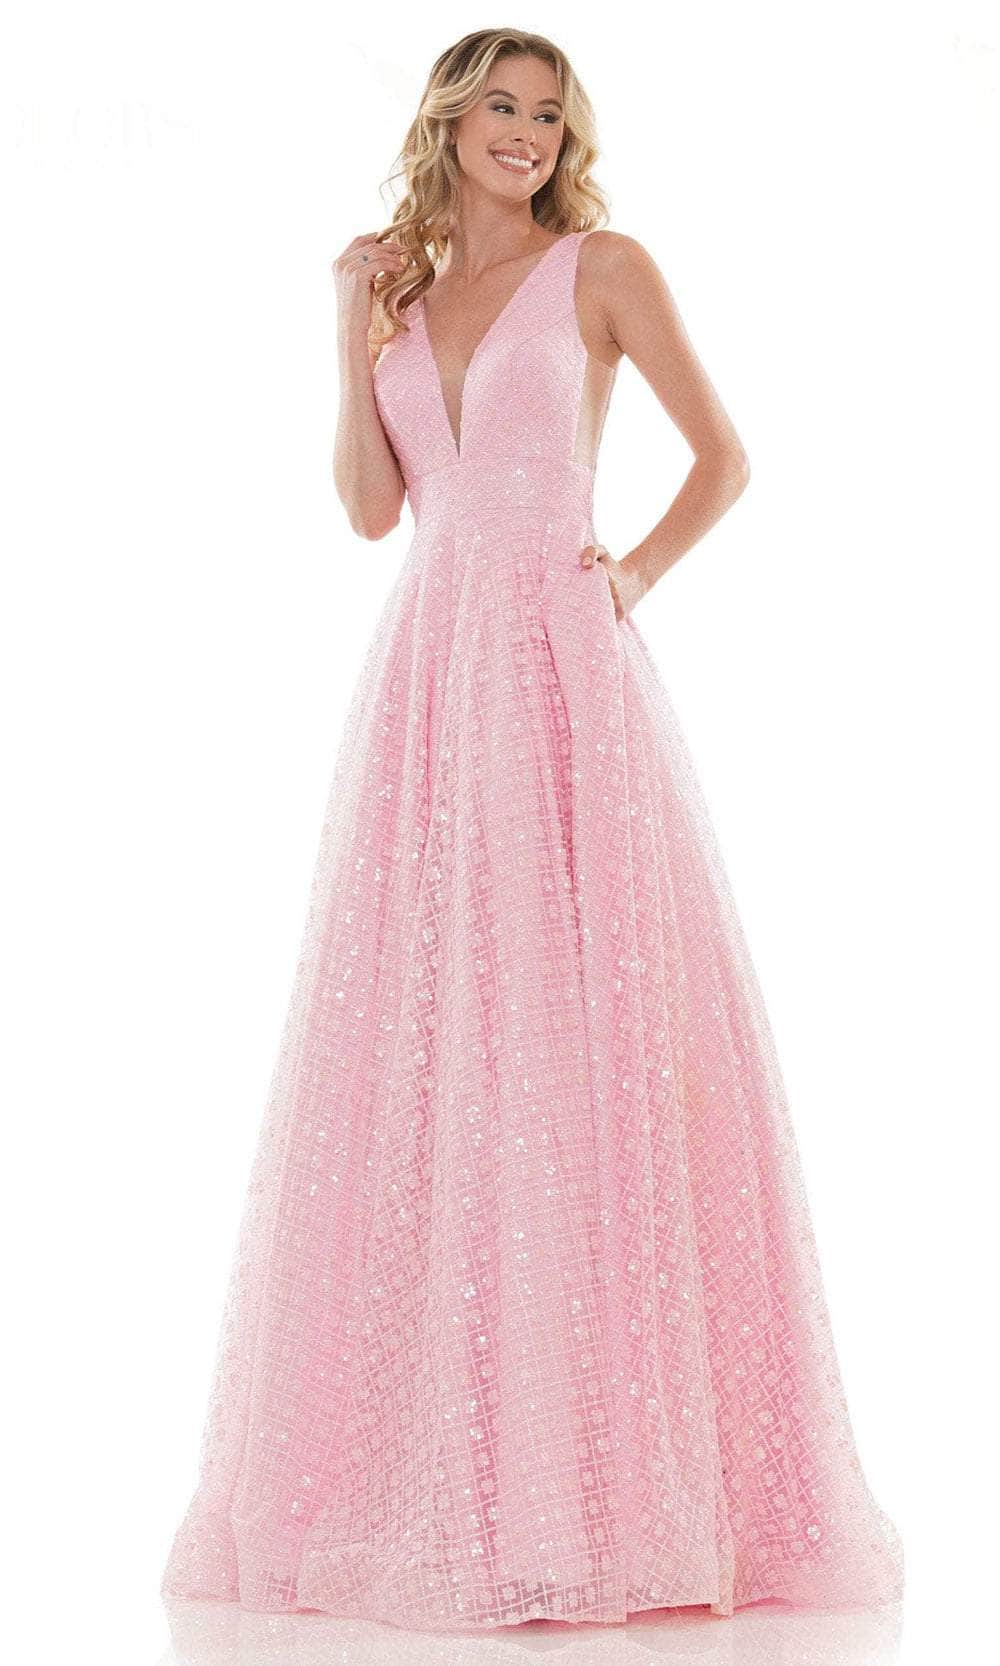 Colors Dress 2170 - Glitter Sequin A-Line Prom Dress Special Occasion Dress 0 / Baby Pink